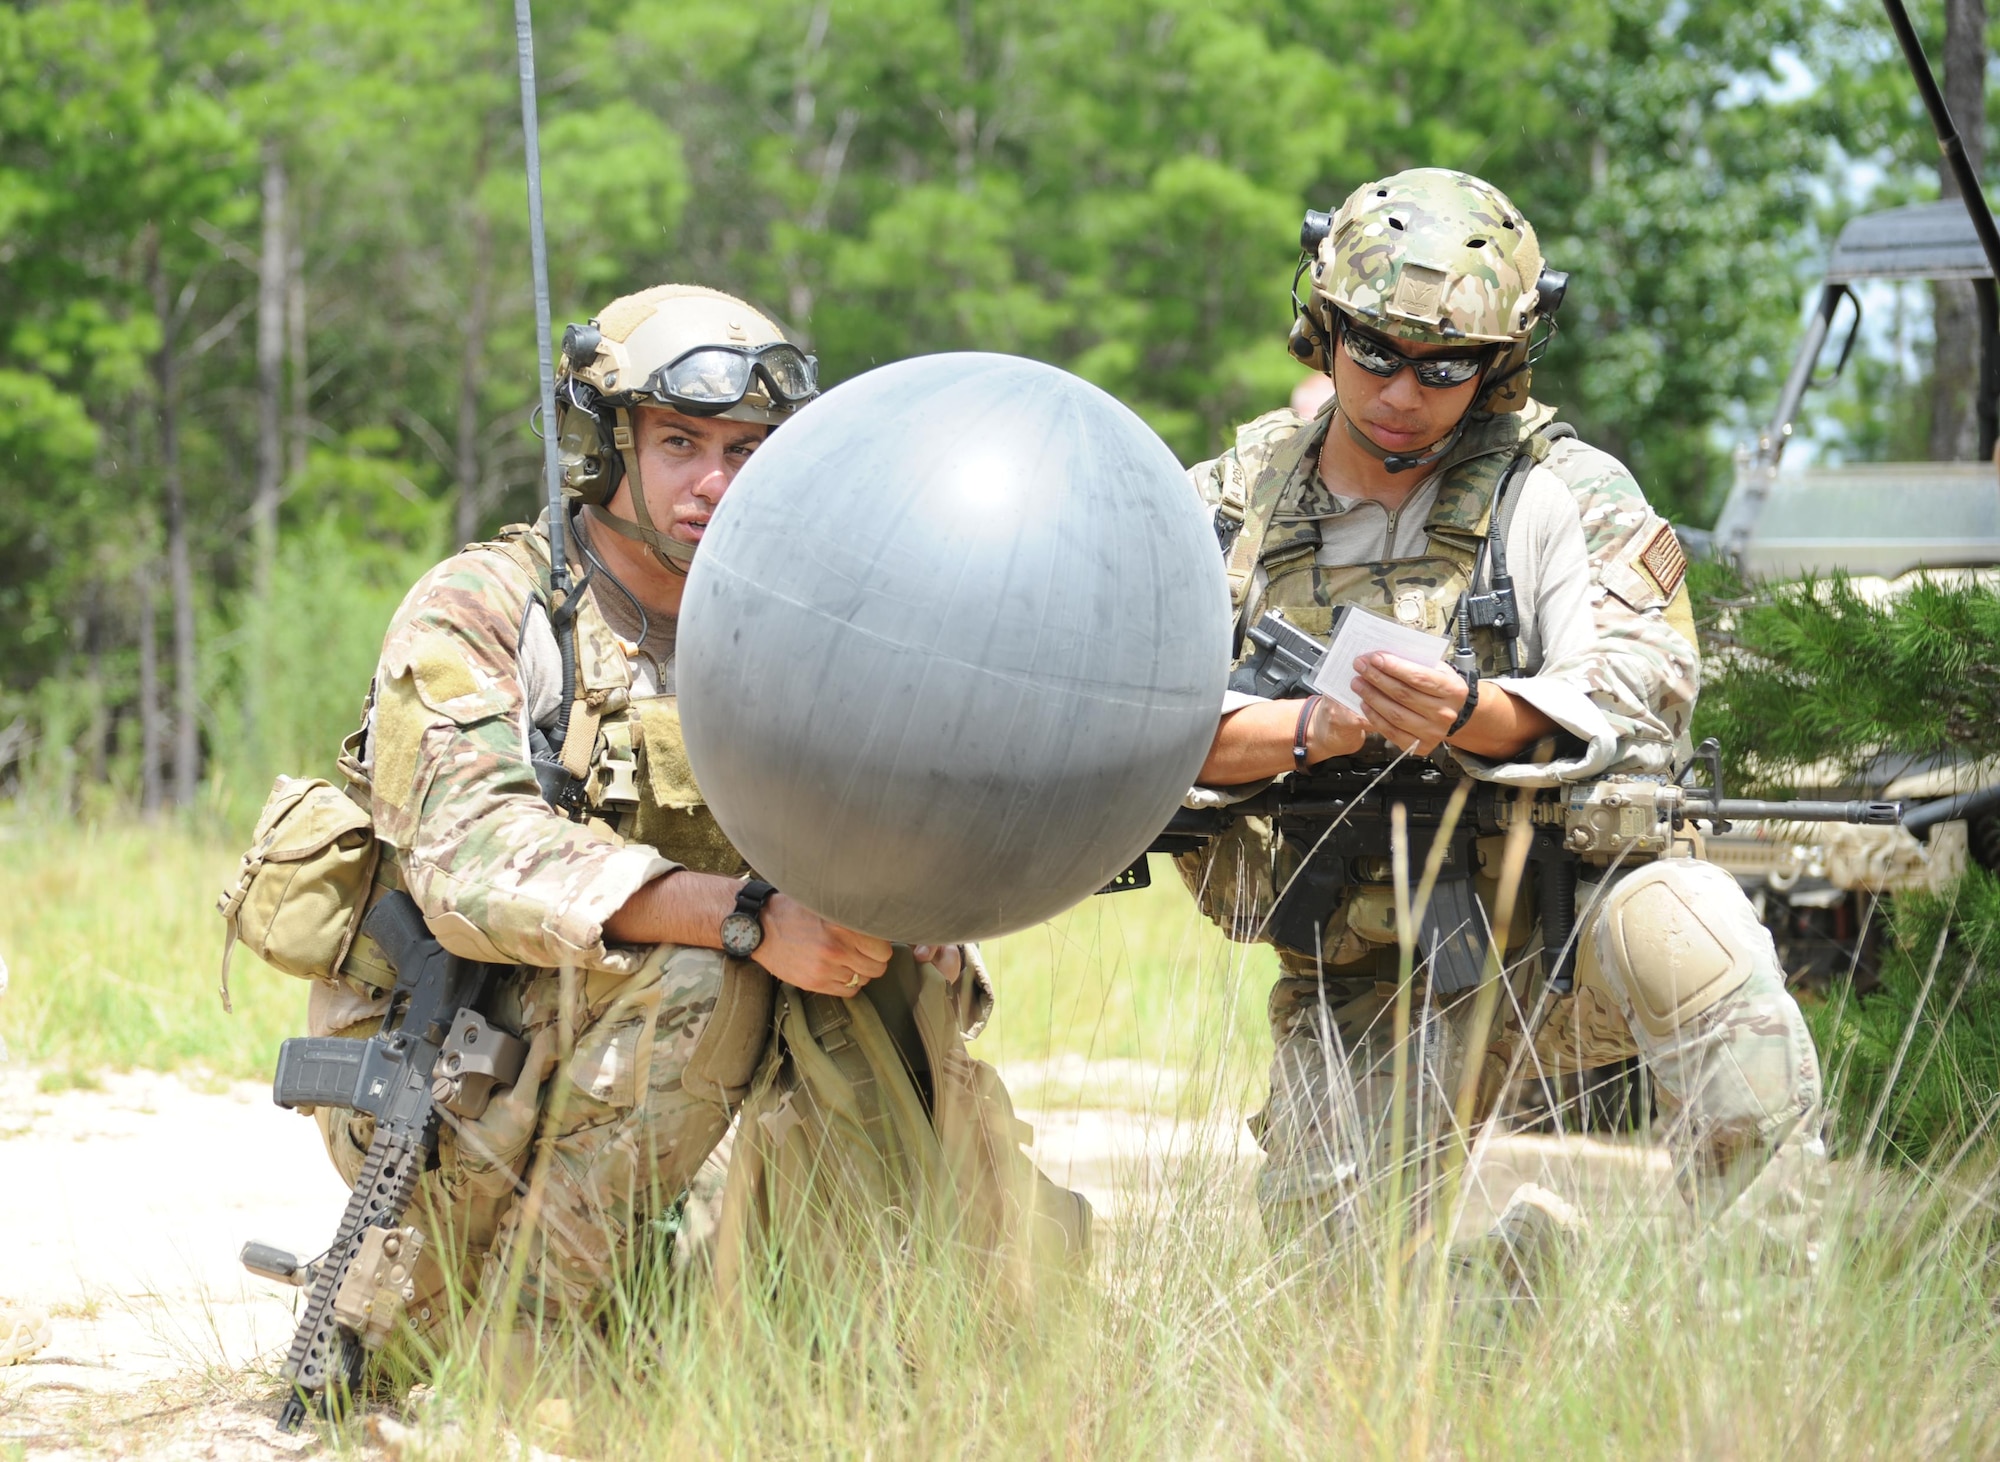 AFRL’s APTO challenges the public to come up with an improved method for dropping humanitarian aid to the public and vital supplies to the warfighter. It will replace the current mobile weather system. (U.S. Air Force photo/Capt Victoria Porto).